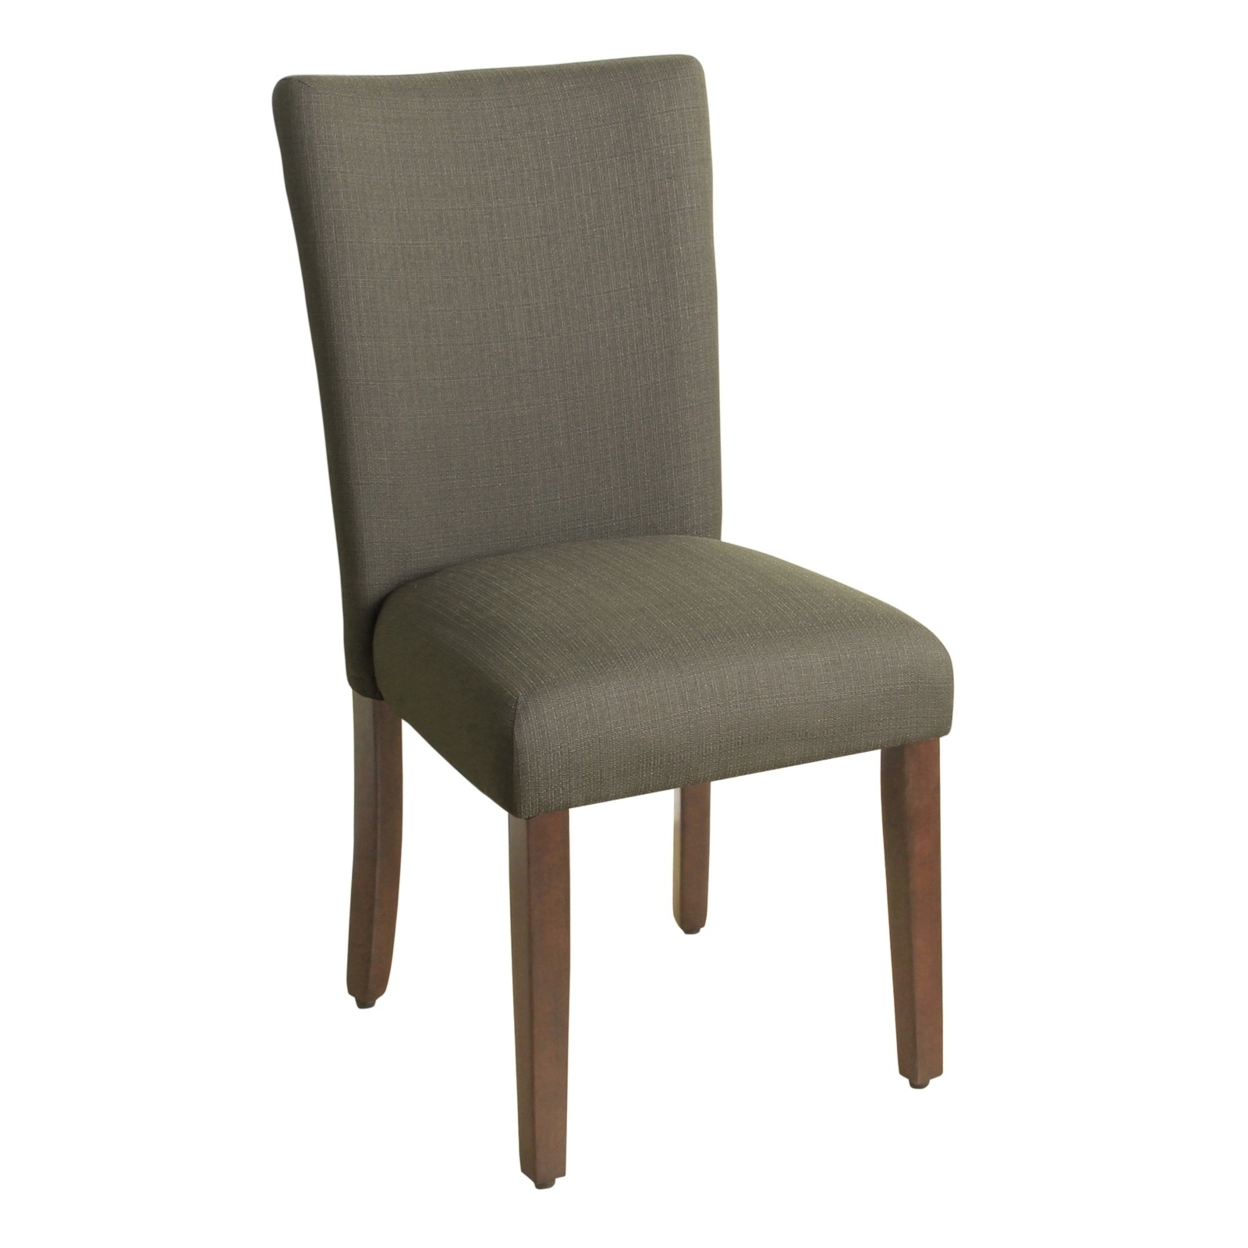 Fabric Upholstered Wooden Parson Dining Chair With Splayed Back And Tapered Front Feet, Brown- Saltoro Sherpi